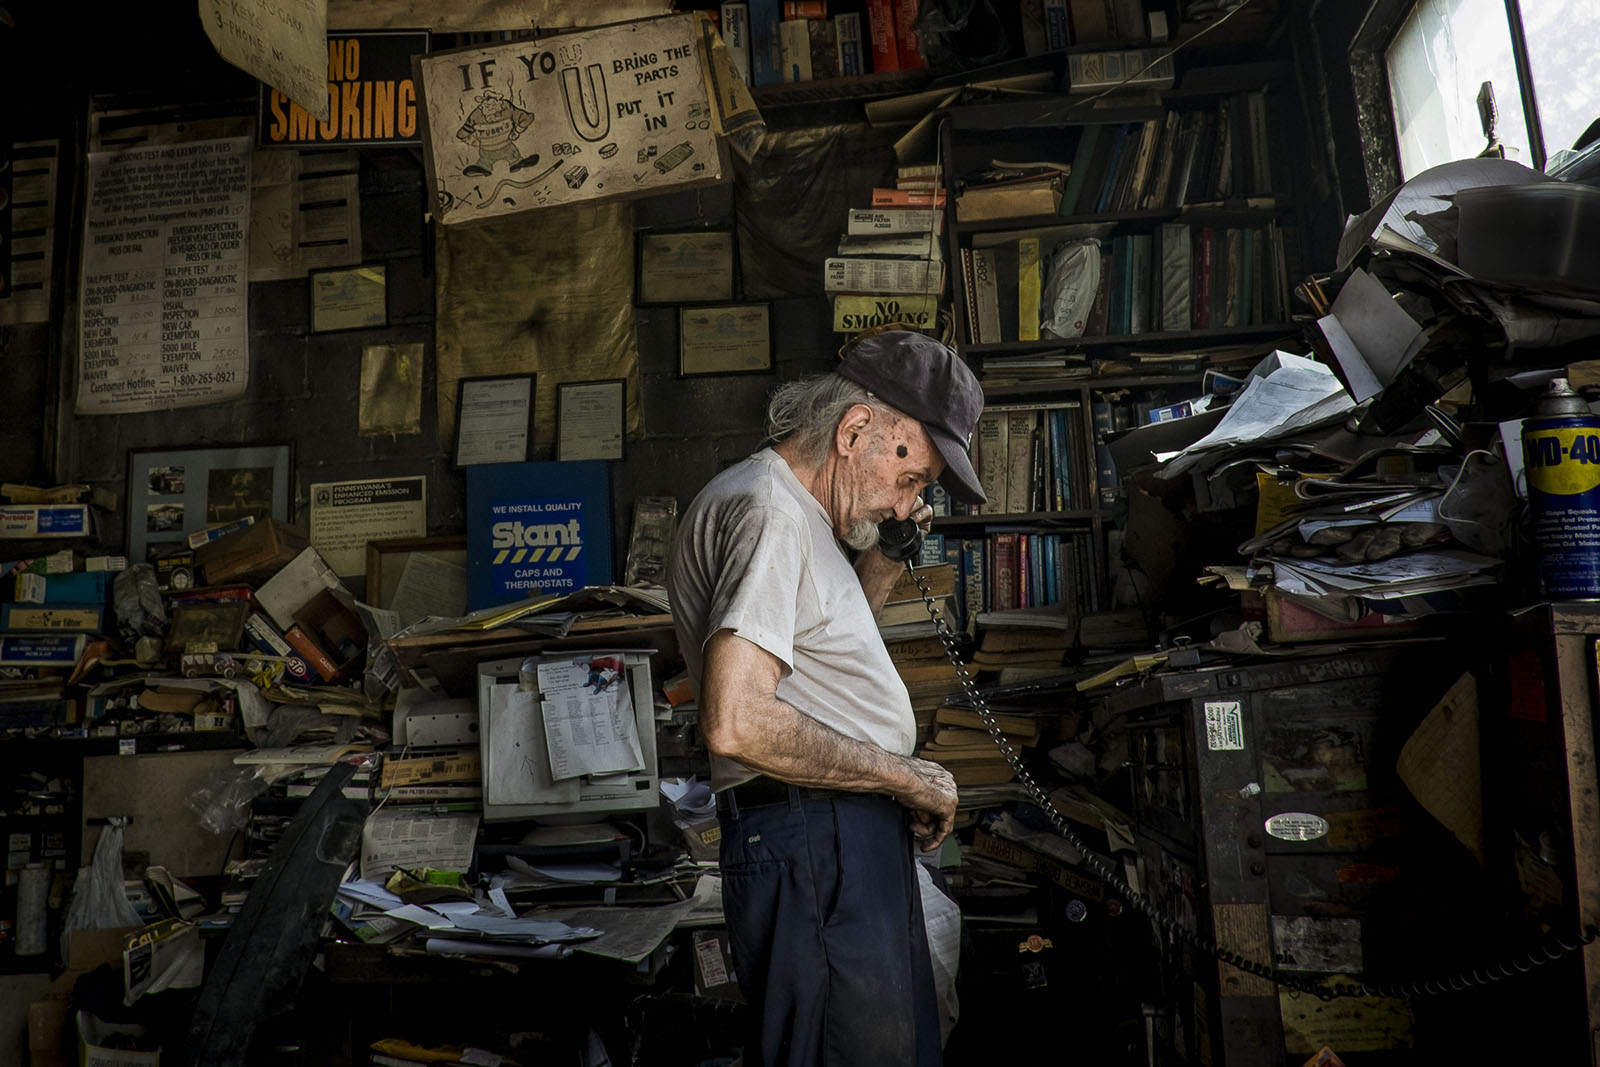 A man talks on the landline telephone at his dingy repair shop.